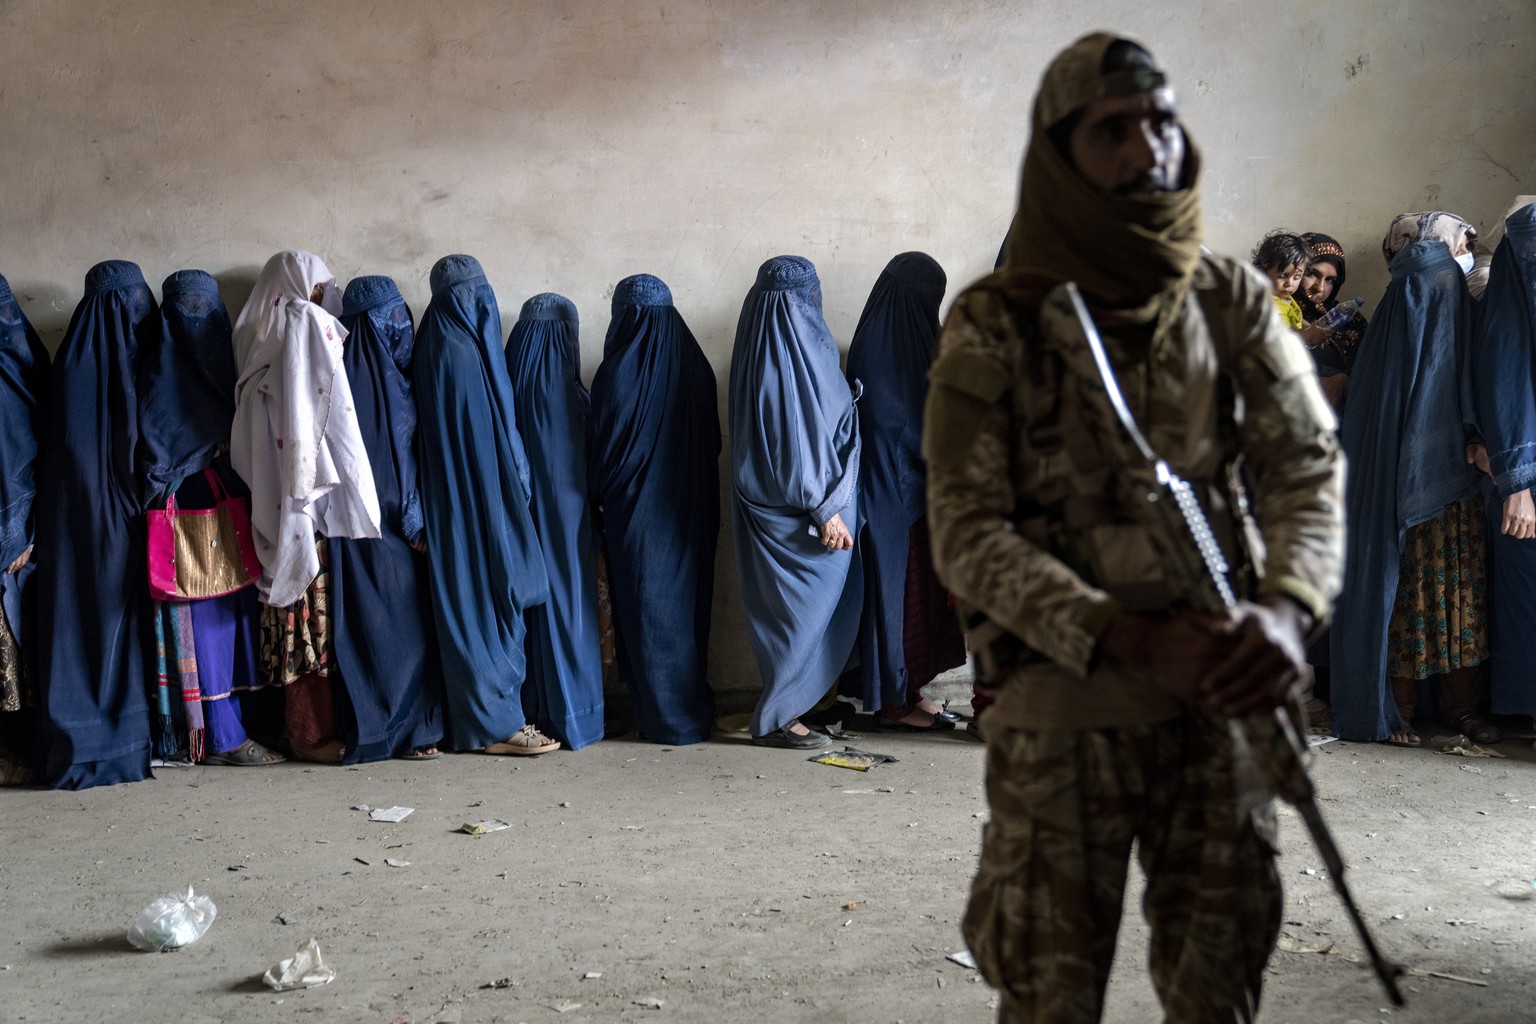 A Taliban fighter stands guard as women wait to receive food rations distributed by a humanitarian aid group in Kabul, Afghanistan, Tuesday, May 23, 2023. (AP Photo/Ebrahim Noroozi)